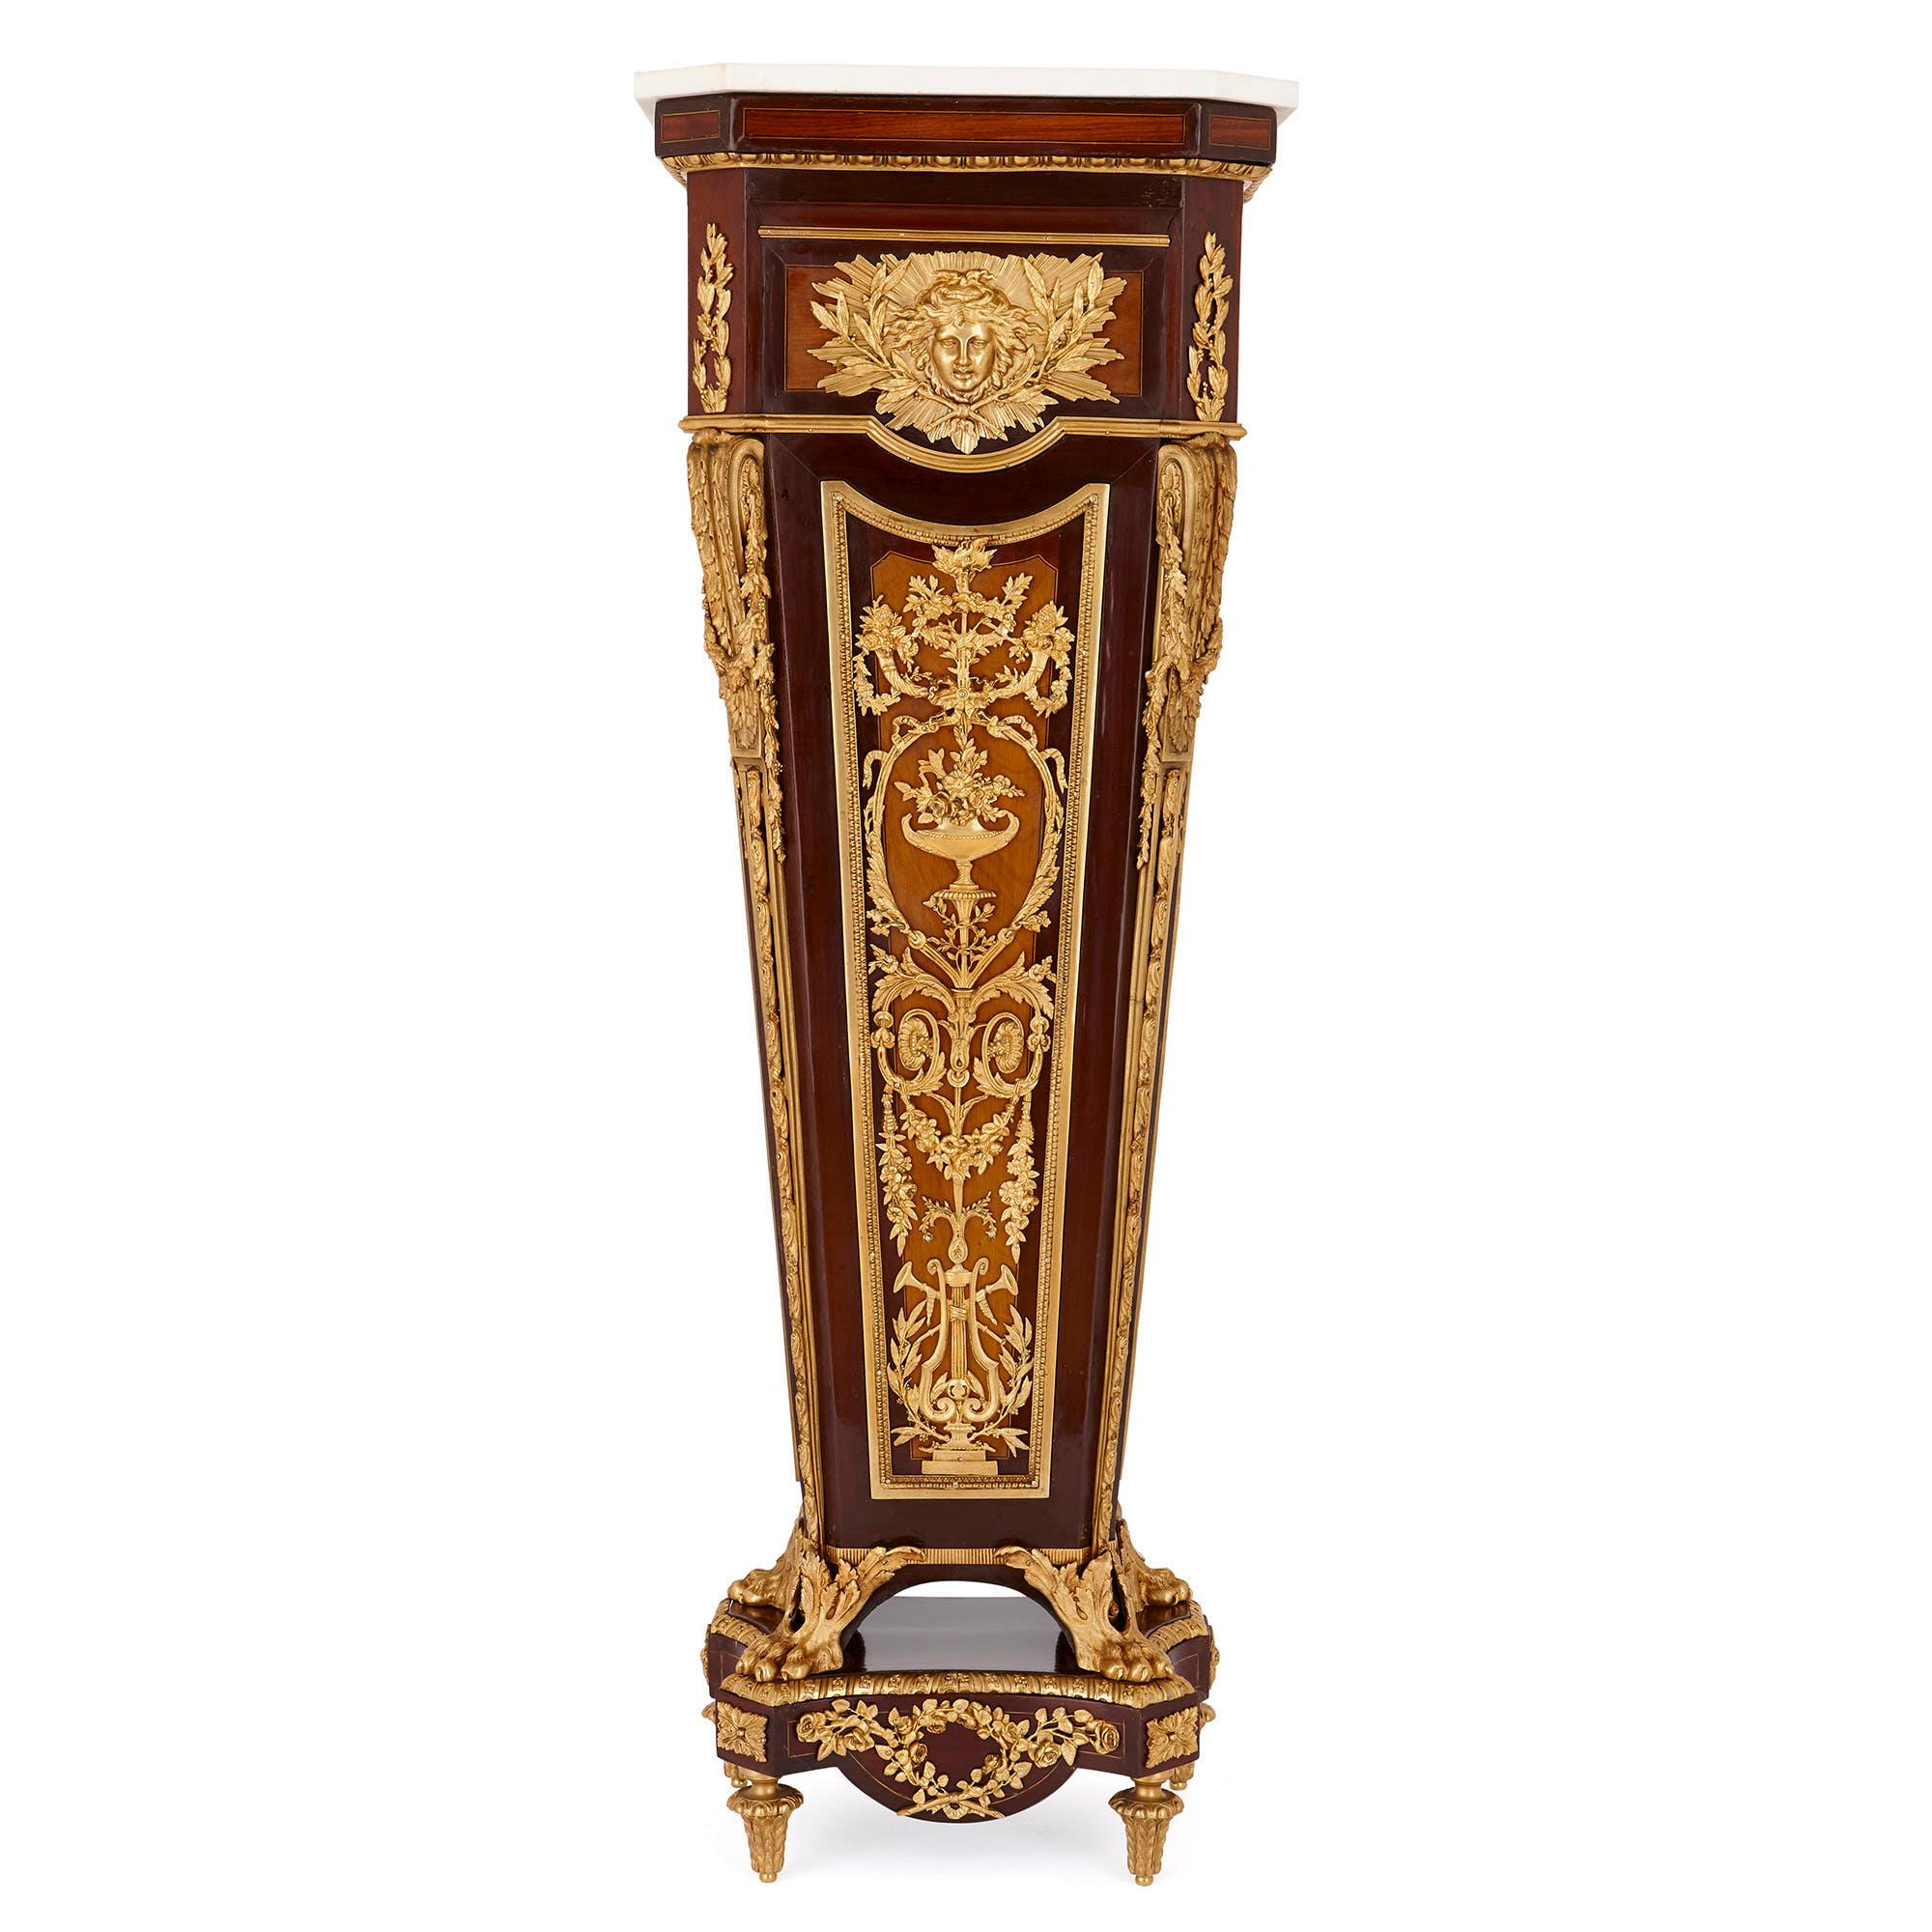 These beautiful pedestals are based on a design by the acclaimed French craftsman, Jean-Henri Riesener (1734-1806). Riesener was the official cabinetmaker to King Louis XVI, and was a particular favourite of Marie-Antoinette. These pedestals are